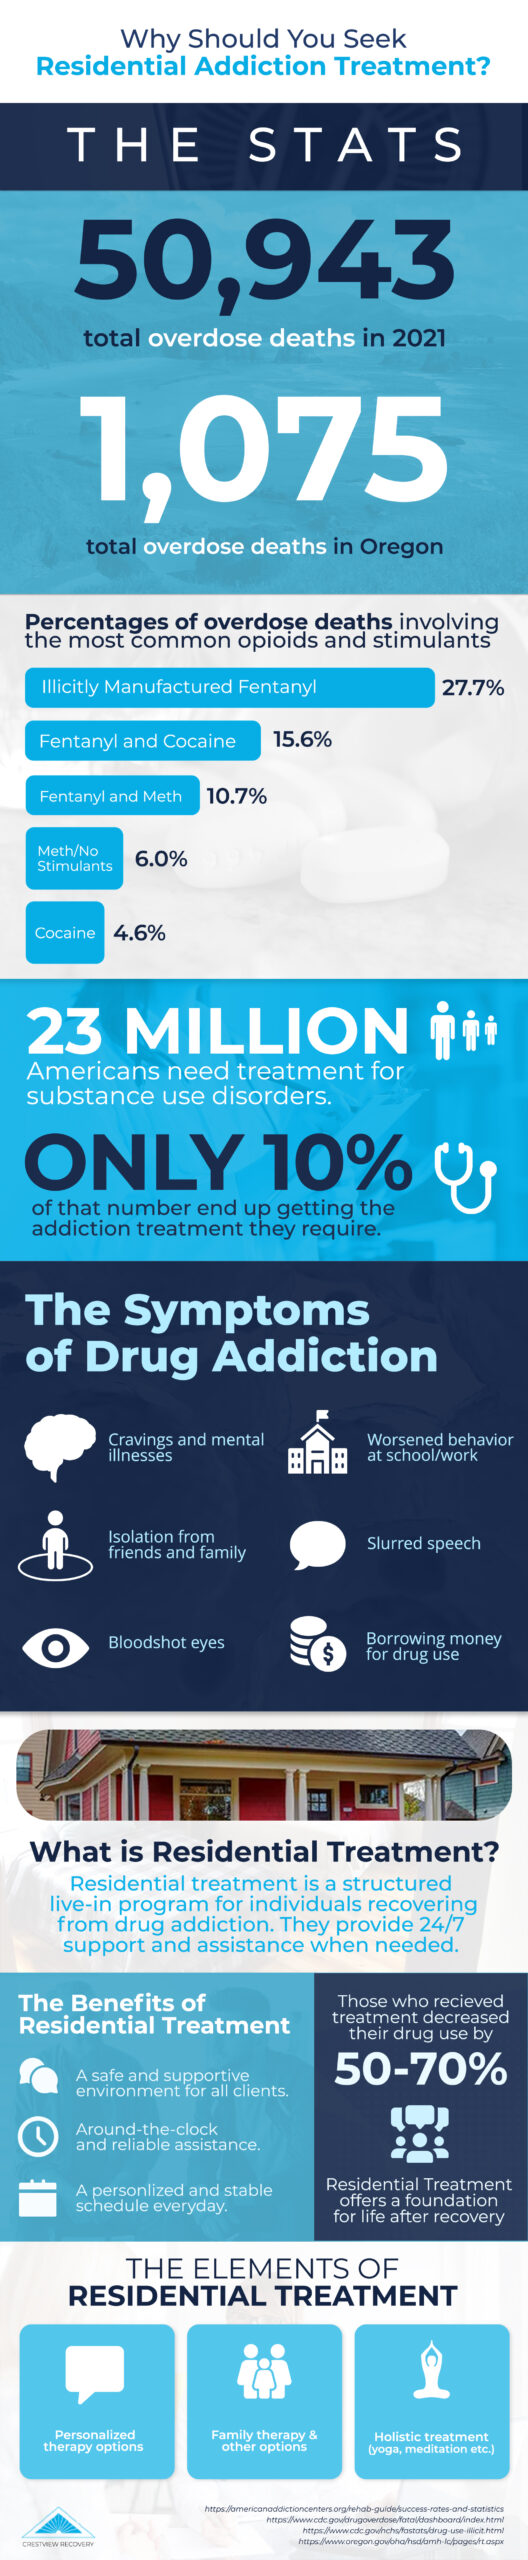 Why Should You Seek Residential Addiction Treatment